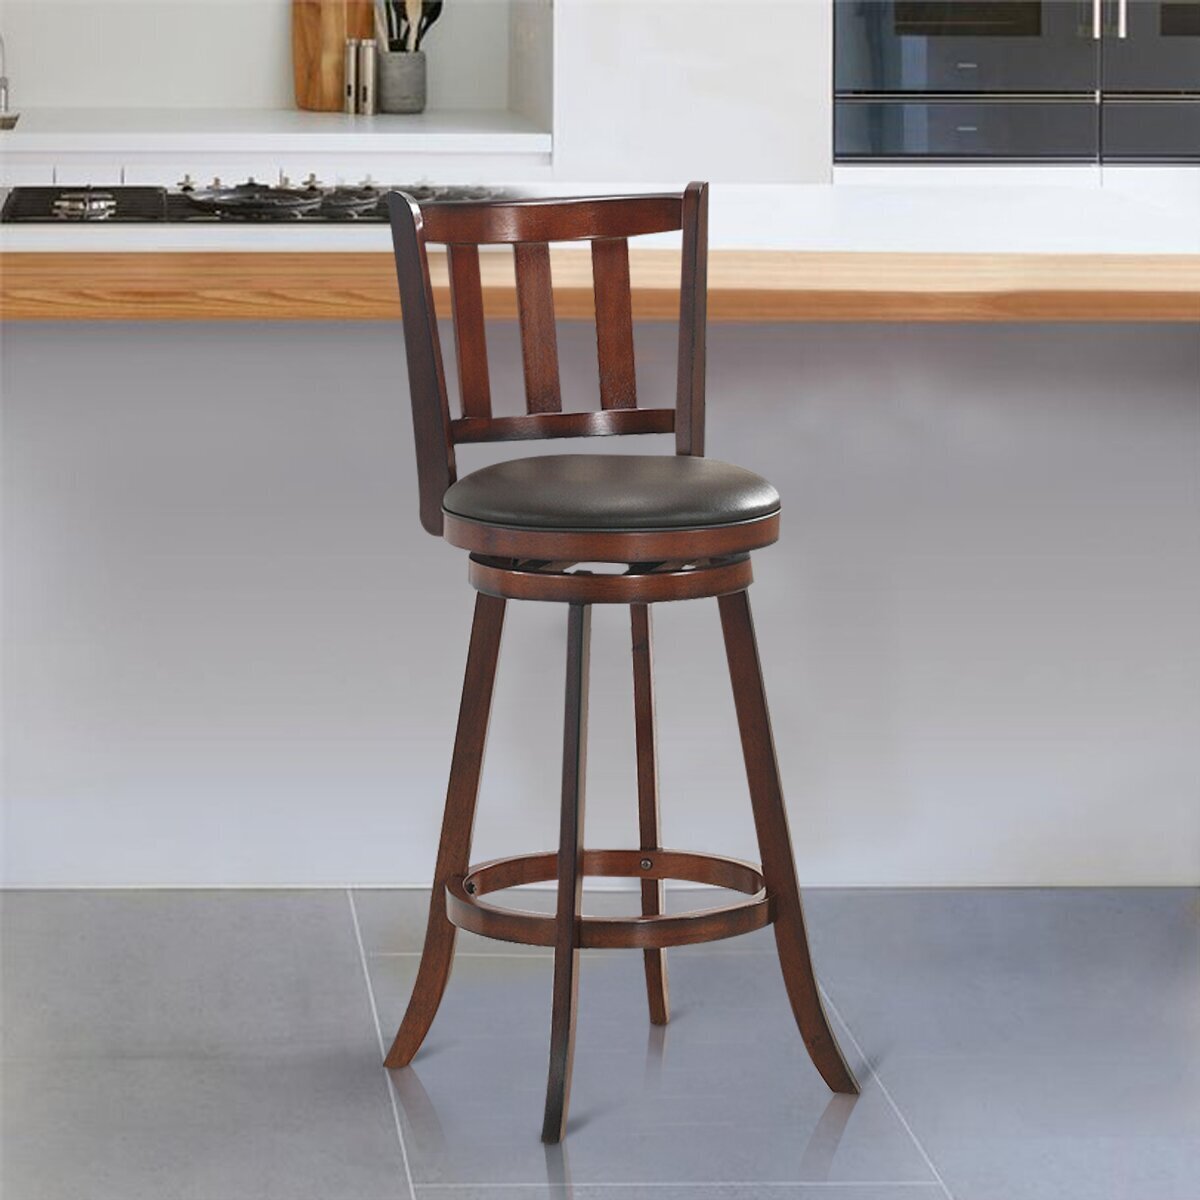 Pub style wooden barstools with back and padded seat